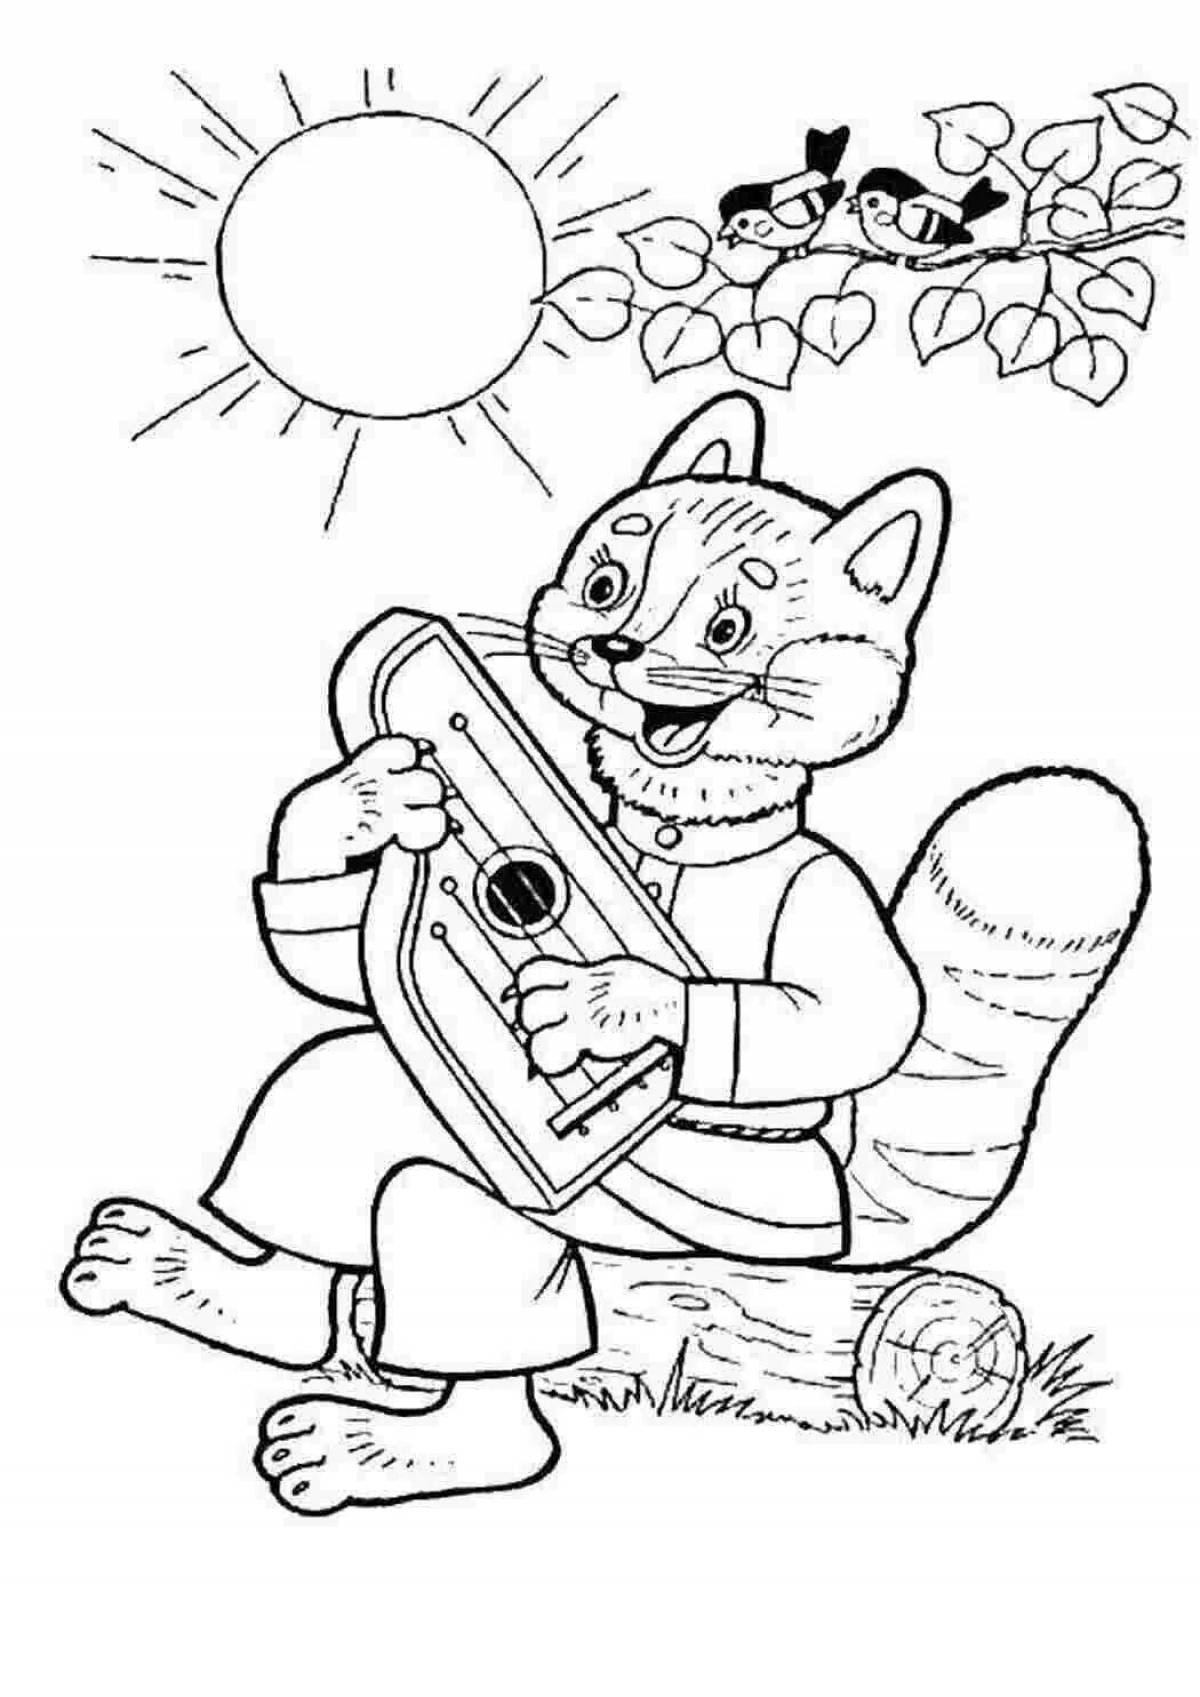 Delightful fox and rooster coloring book